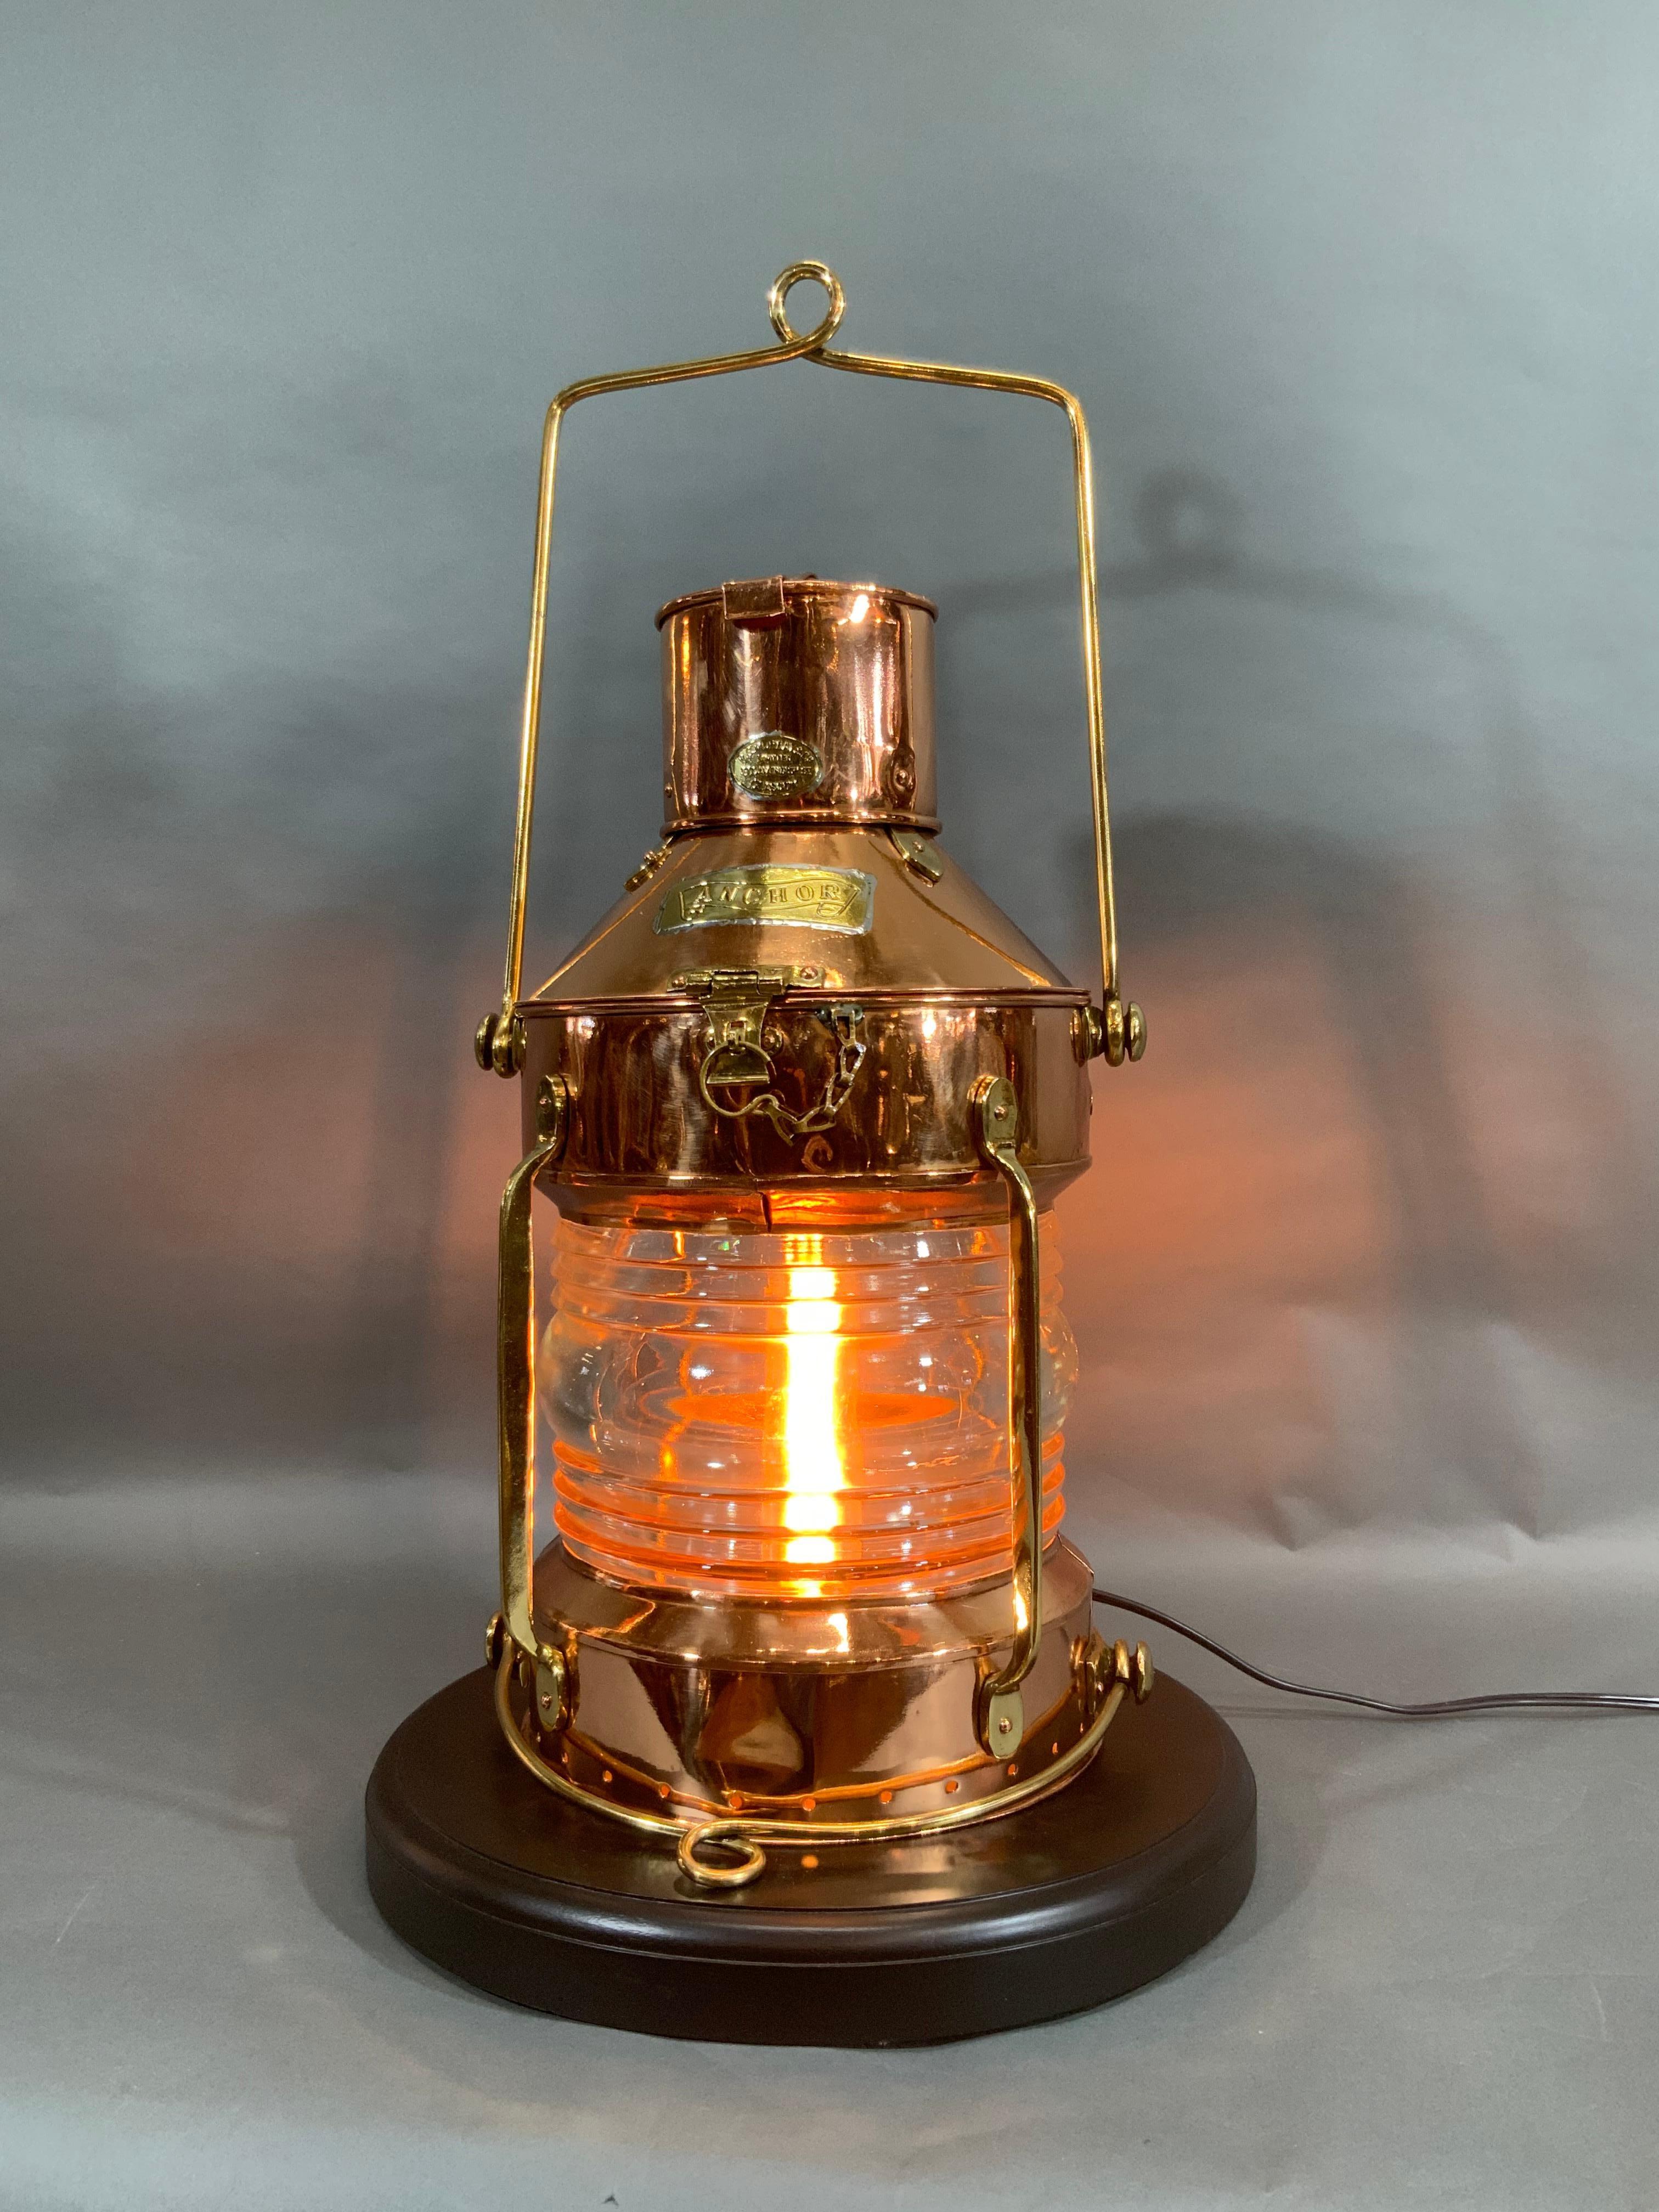 Ship's anchor lantern of polished brass and copper. Maker is R.C. Murray Limited, 37 Cavendish St, Glasgow. Meticulously polished and lacquered, this has been completely restored by us. Glass Fresnel lens, wired with socket for home use. With brass